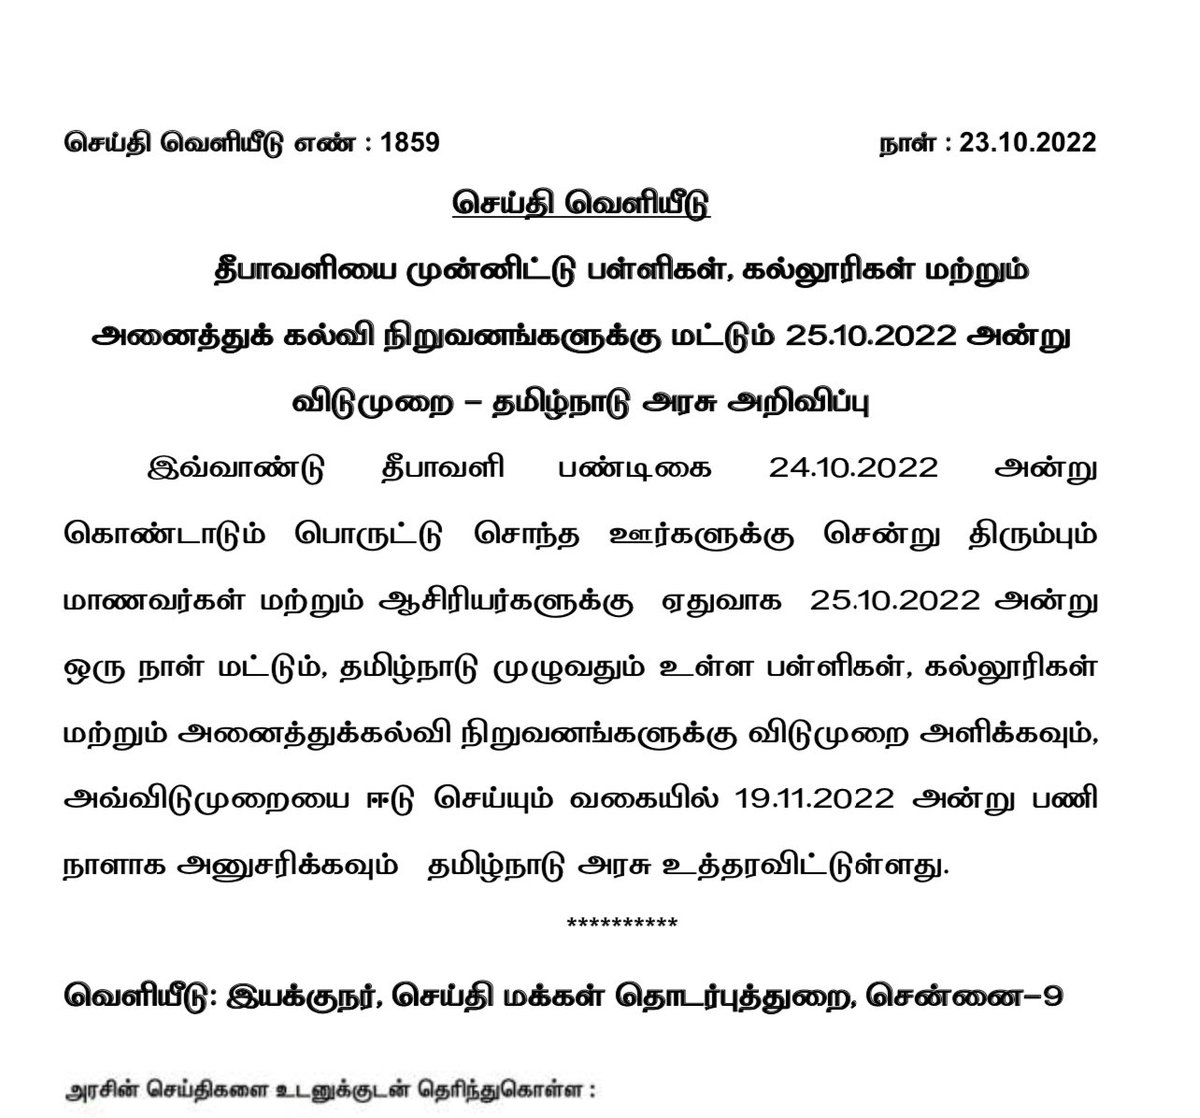 TN government declared holiday on 25th October for all educatiinal institutions in the state